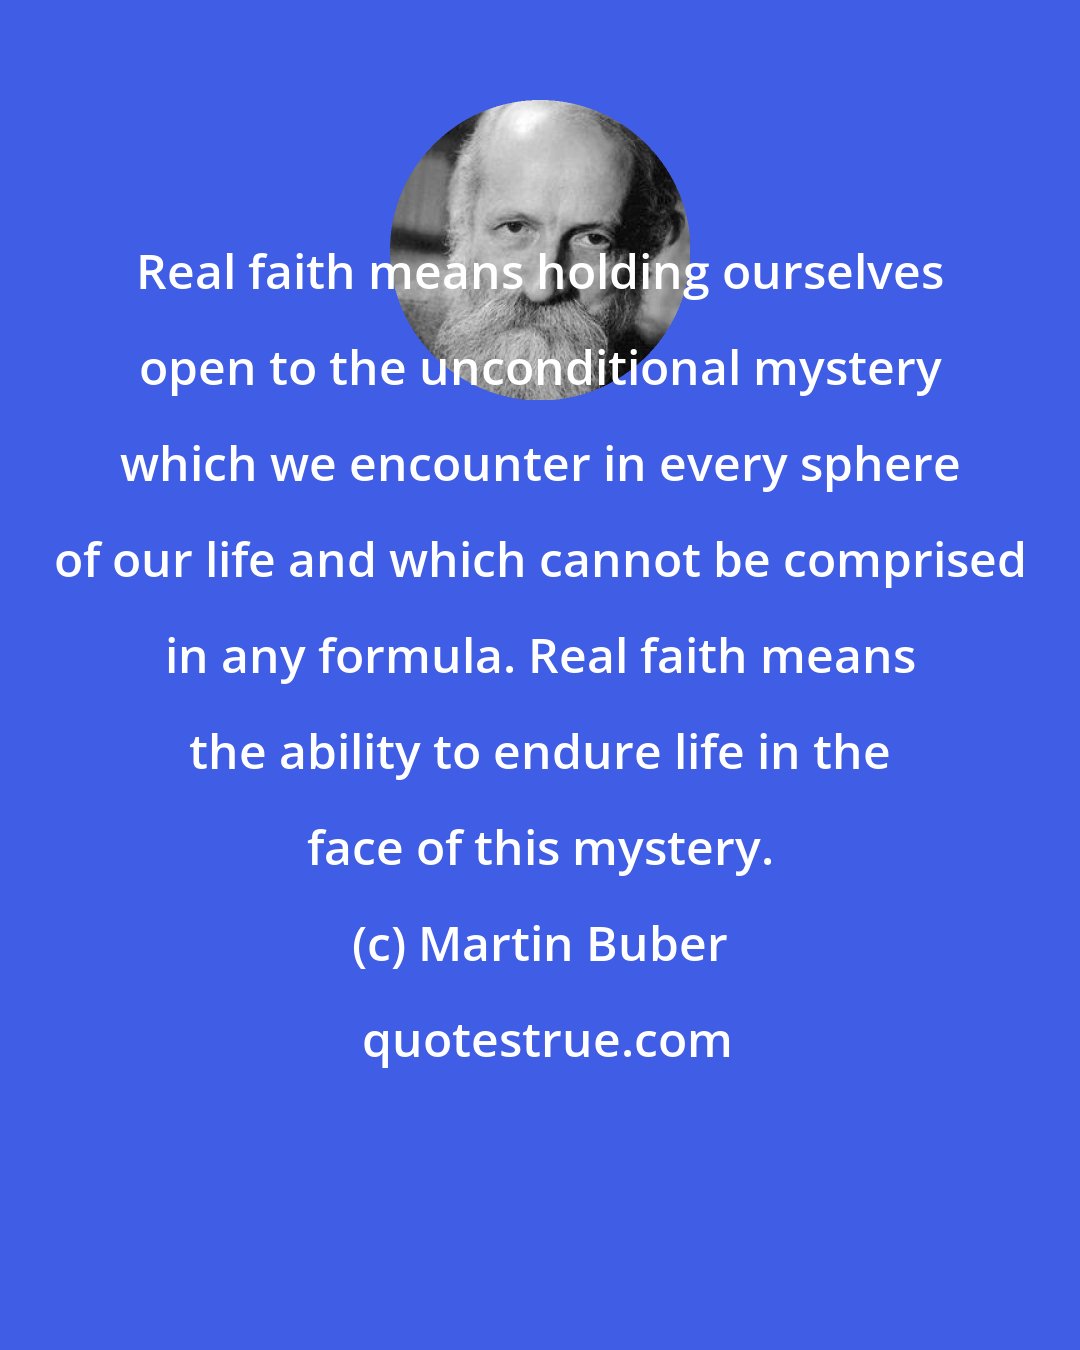 Martin Buber: Real faith means holding ourselves open to the unconditional mystery which we encounter in every sphere of our life and which cannot be comprised in any formula. Real faith means the ability to endure life in the face of this mystery.